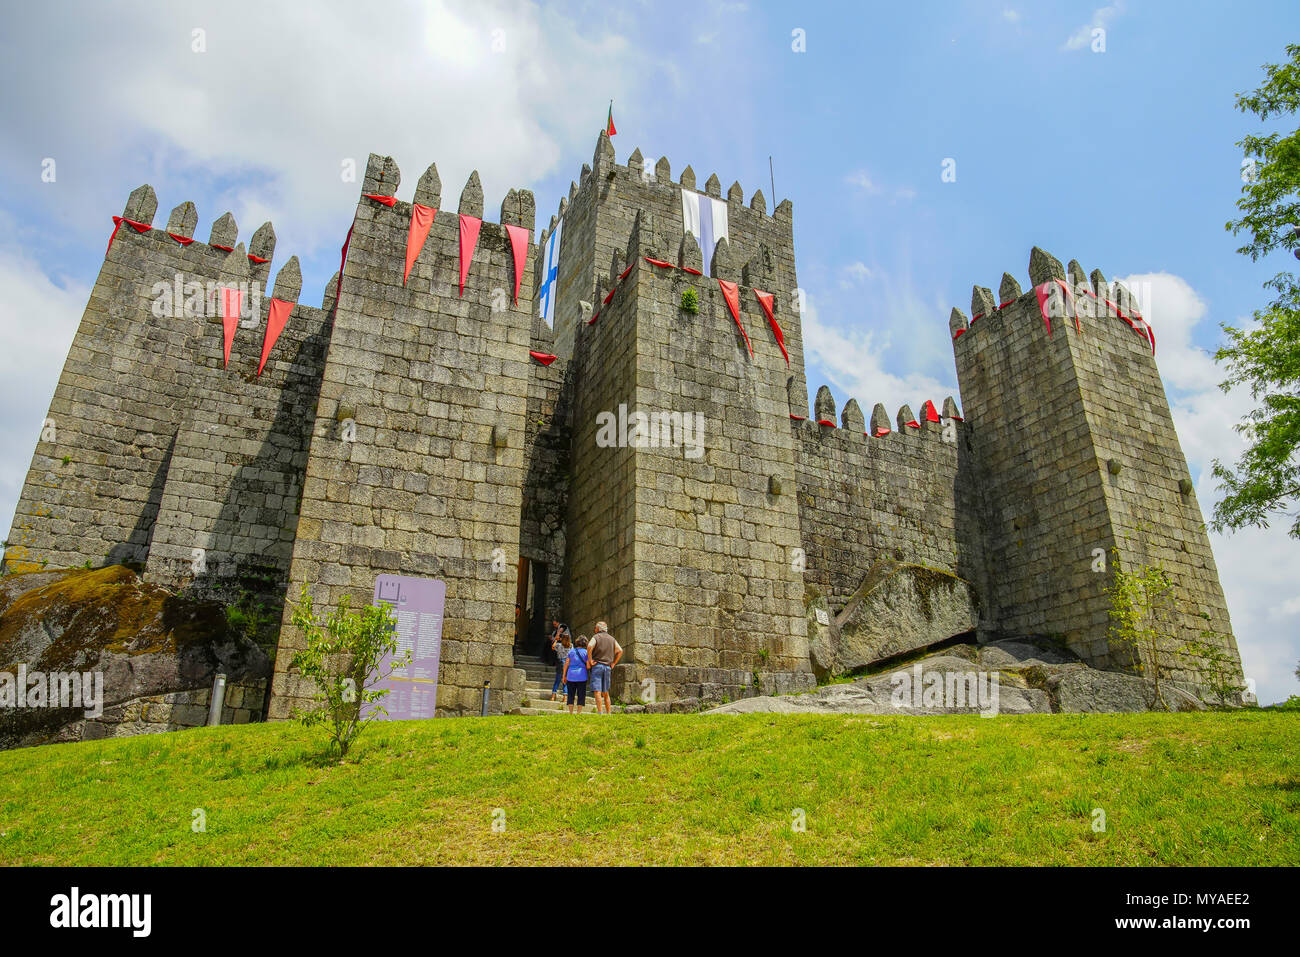 The Castle of Guimarães, Portugal Stock Photo